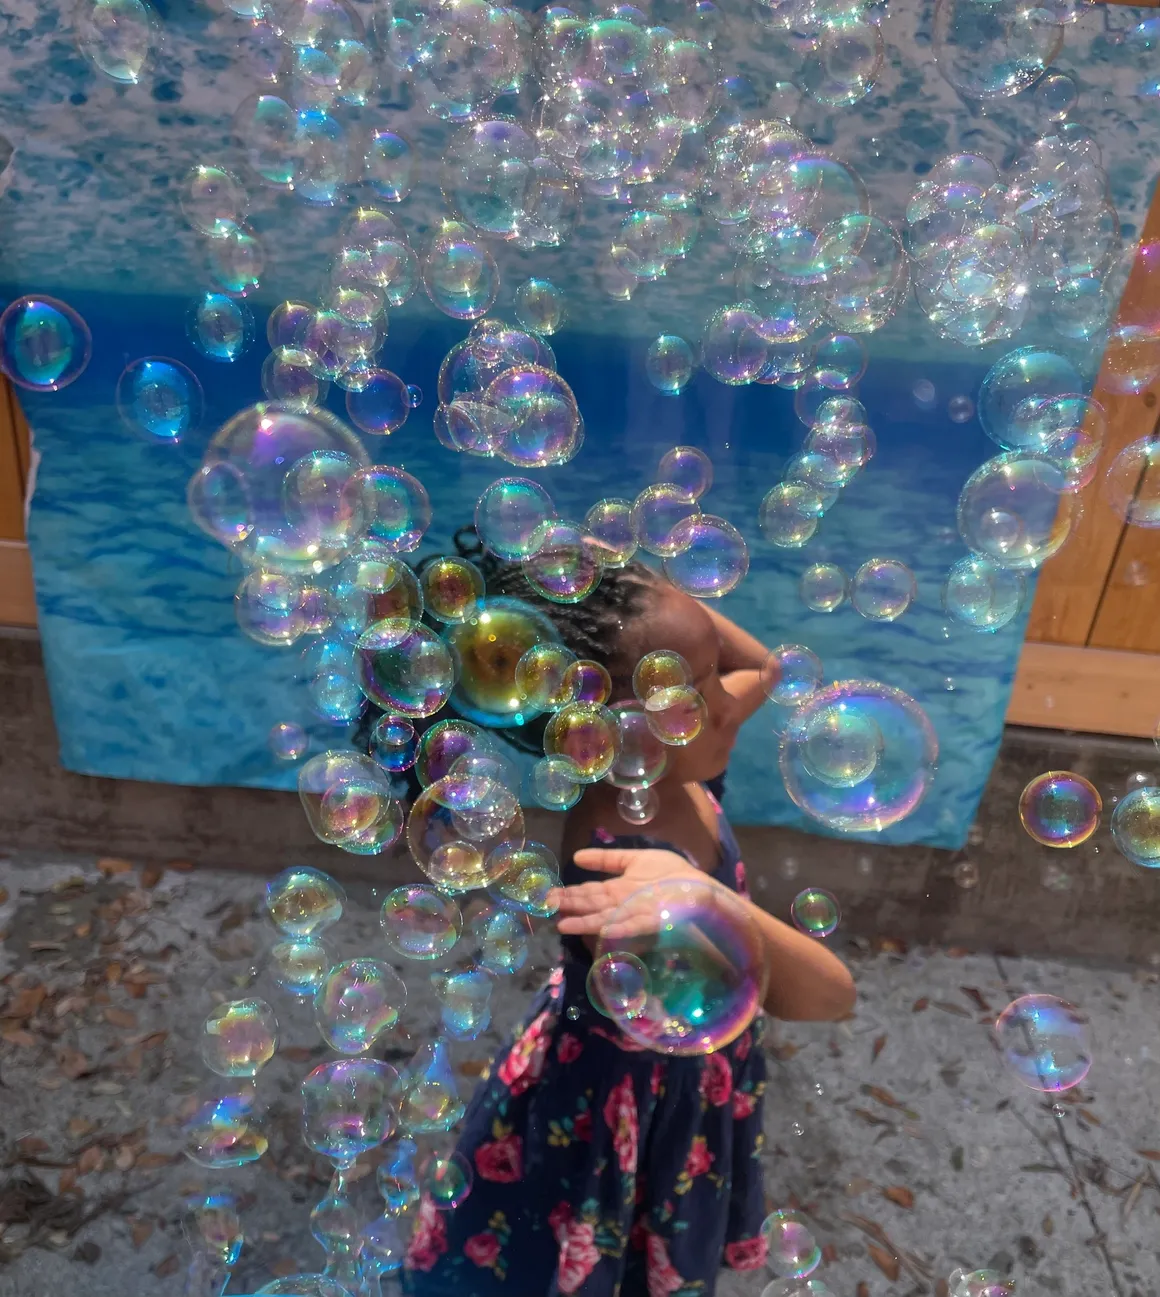 A girl is blowing bubbles in front of the ocean.